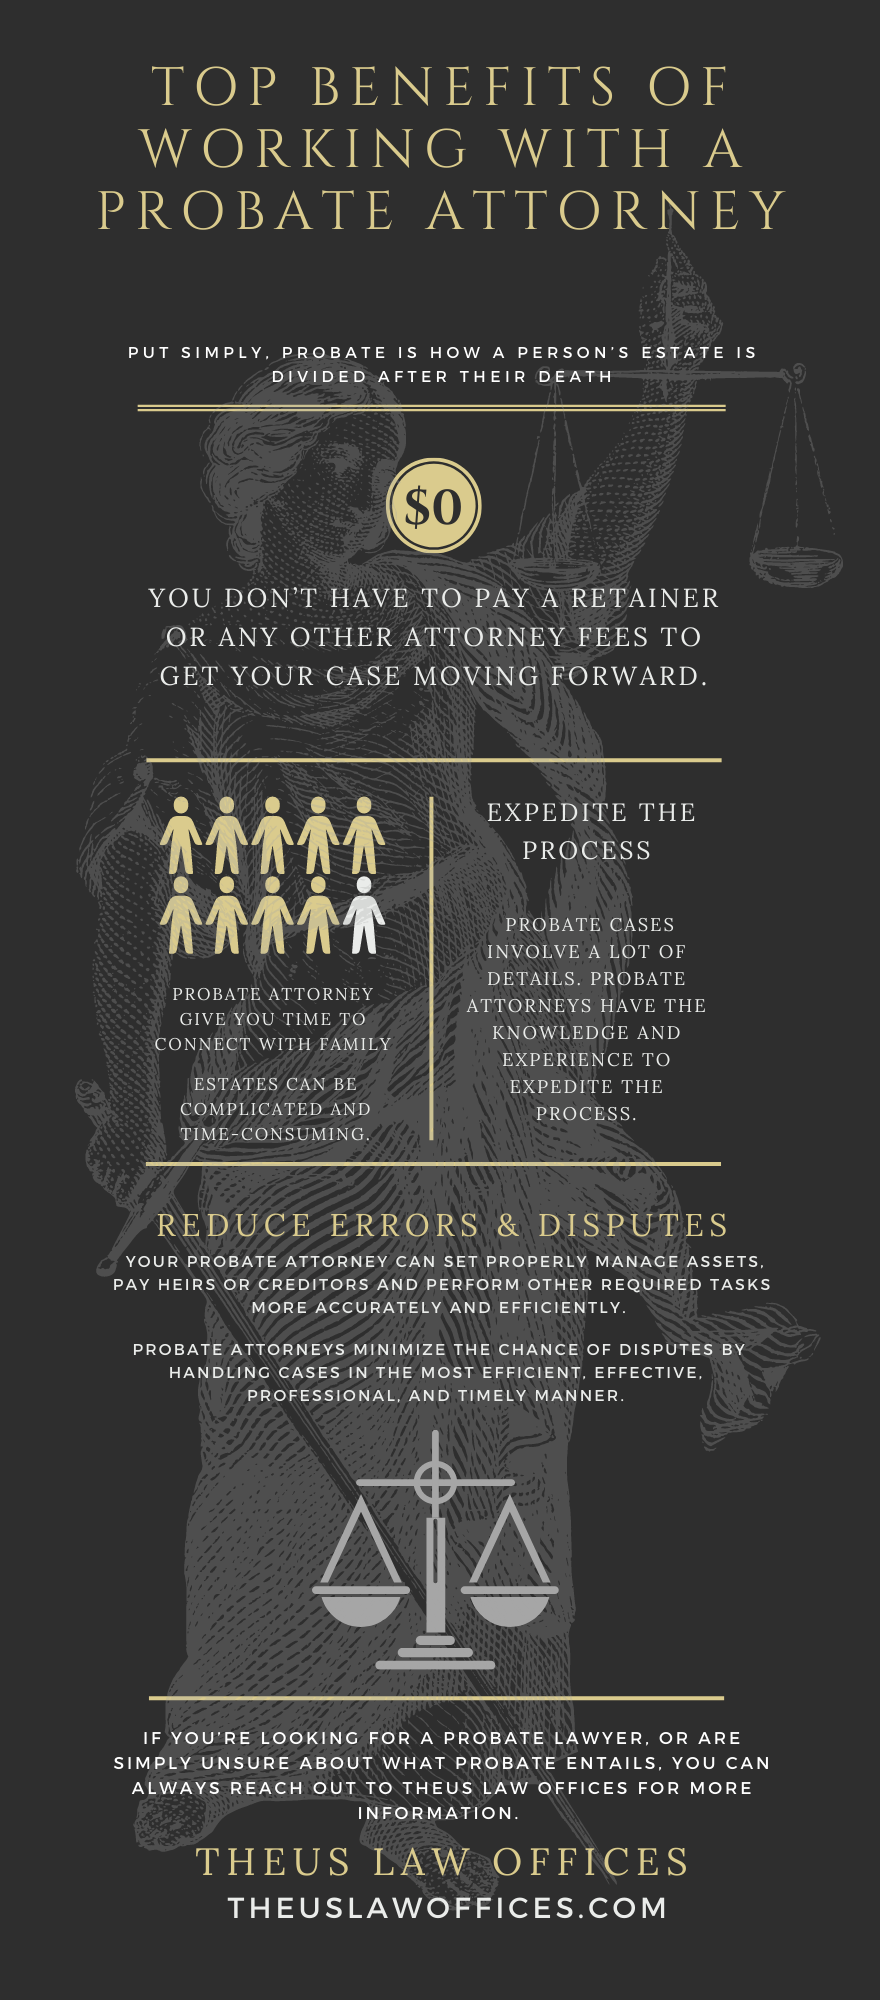 Top Benefits of Working with a Probate Attorney Infographic